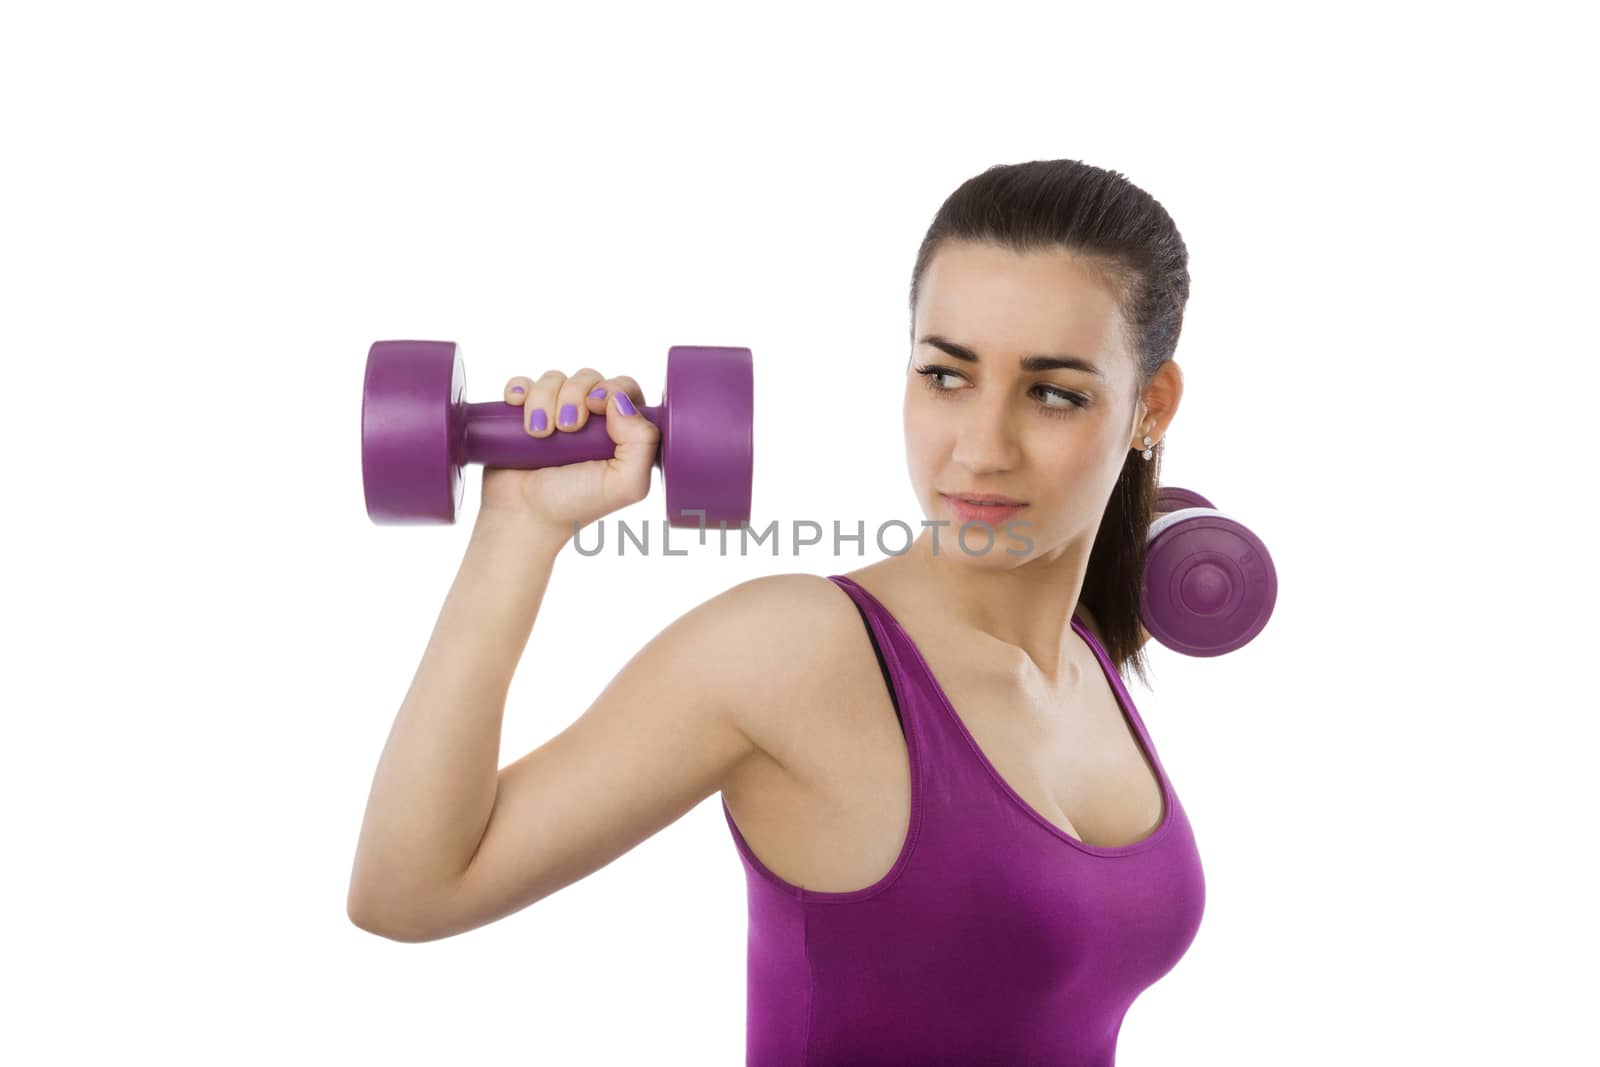 Beautiful girl with purple top and purple dumbbells isolated on white background. Sport and fitness, healthy living.